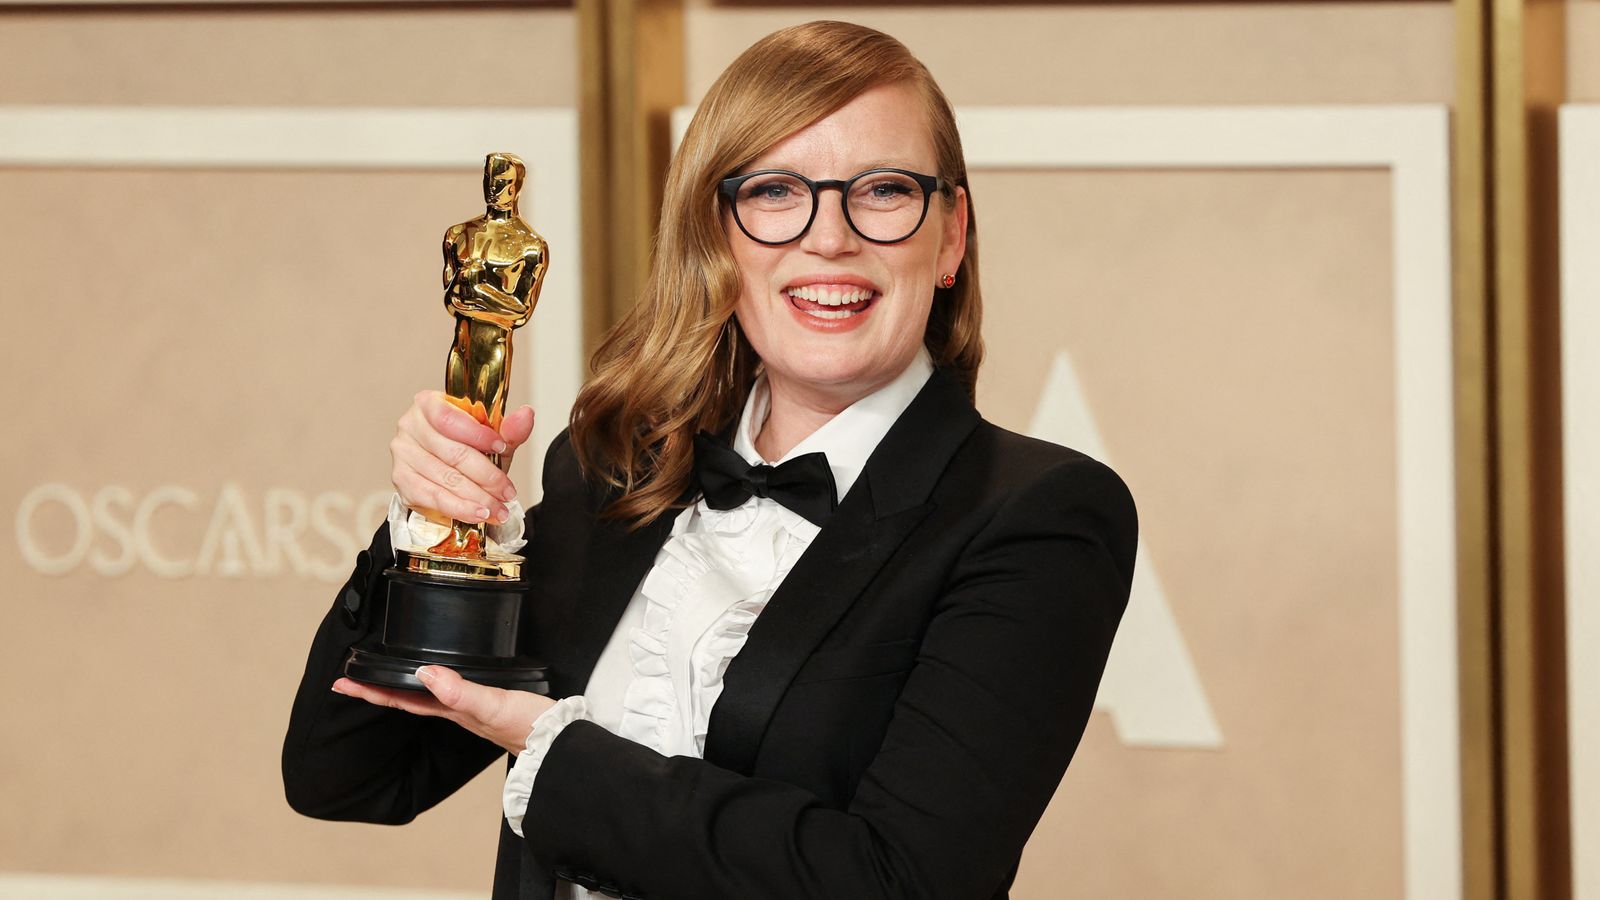 Oscar winner Sarah Polley ordered to hand back award in April Fools' Day prank